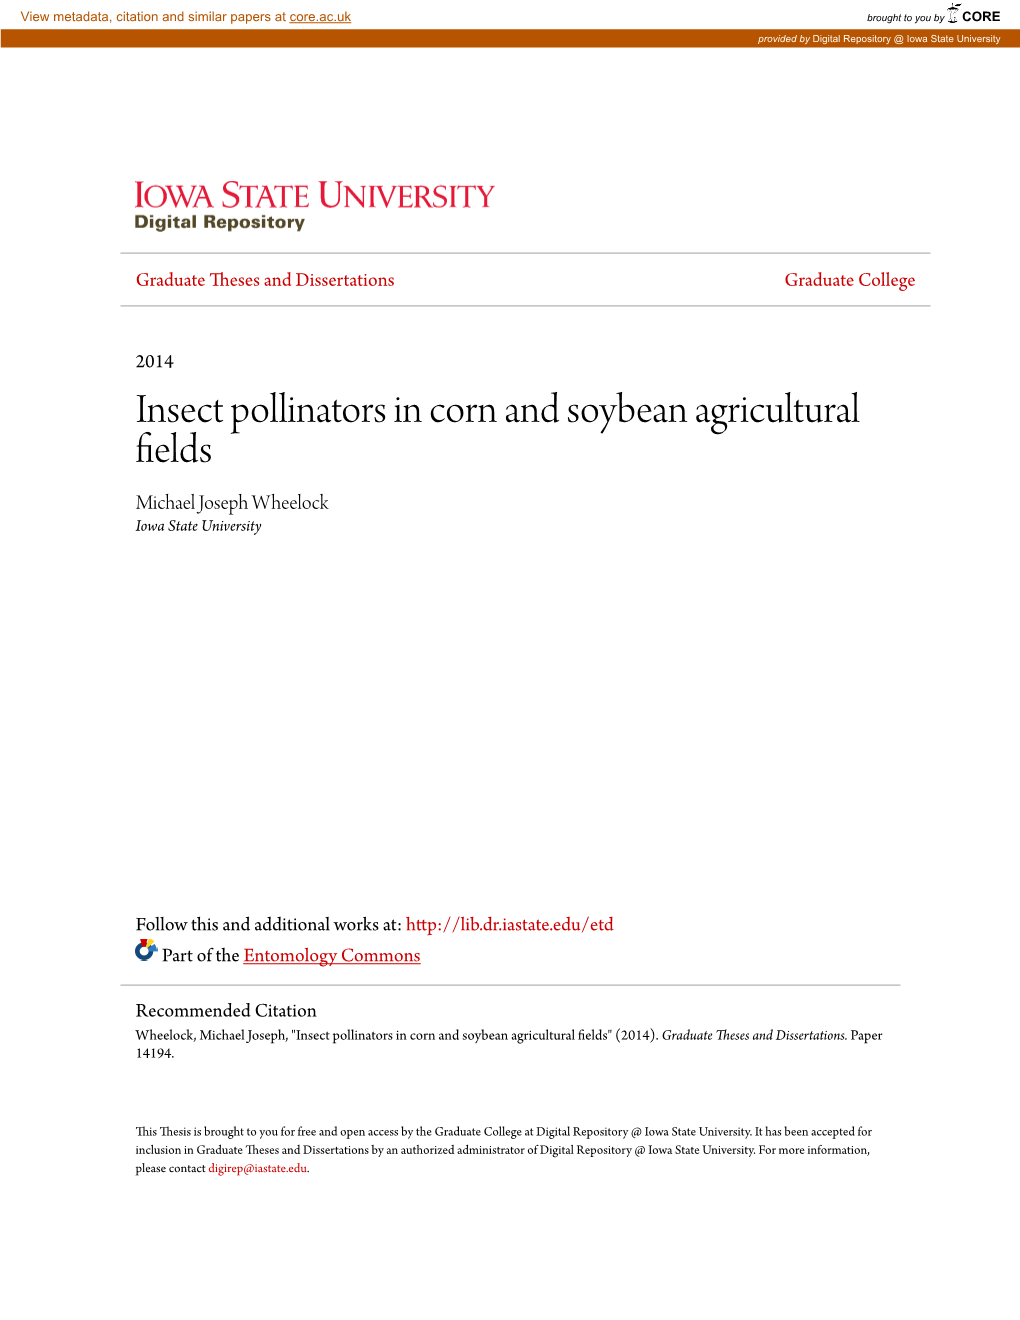 Insect Pollinators in Corn and Soybean Agricultural Fields Michael Joseph Wheelock Iowa State University